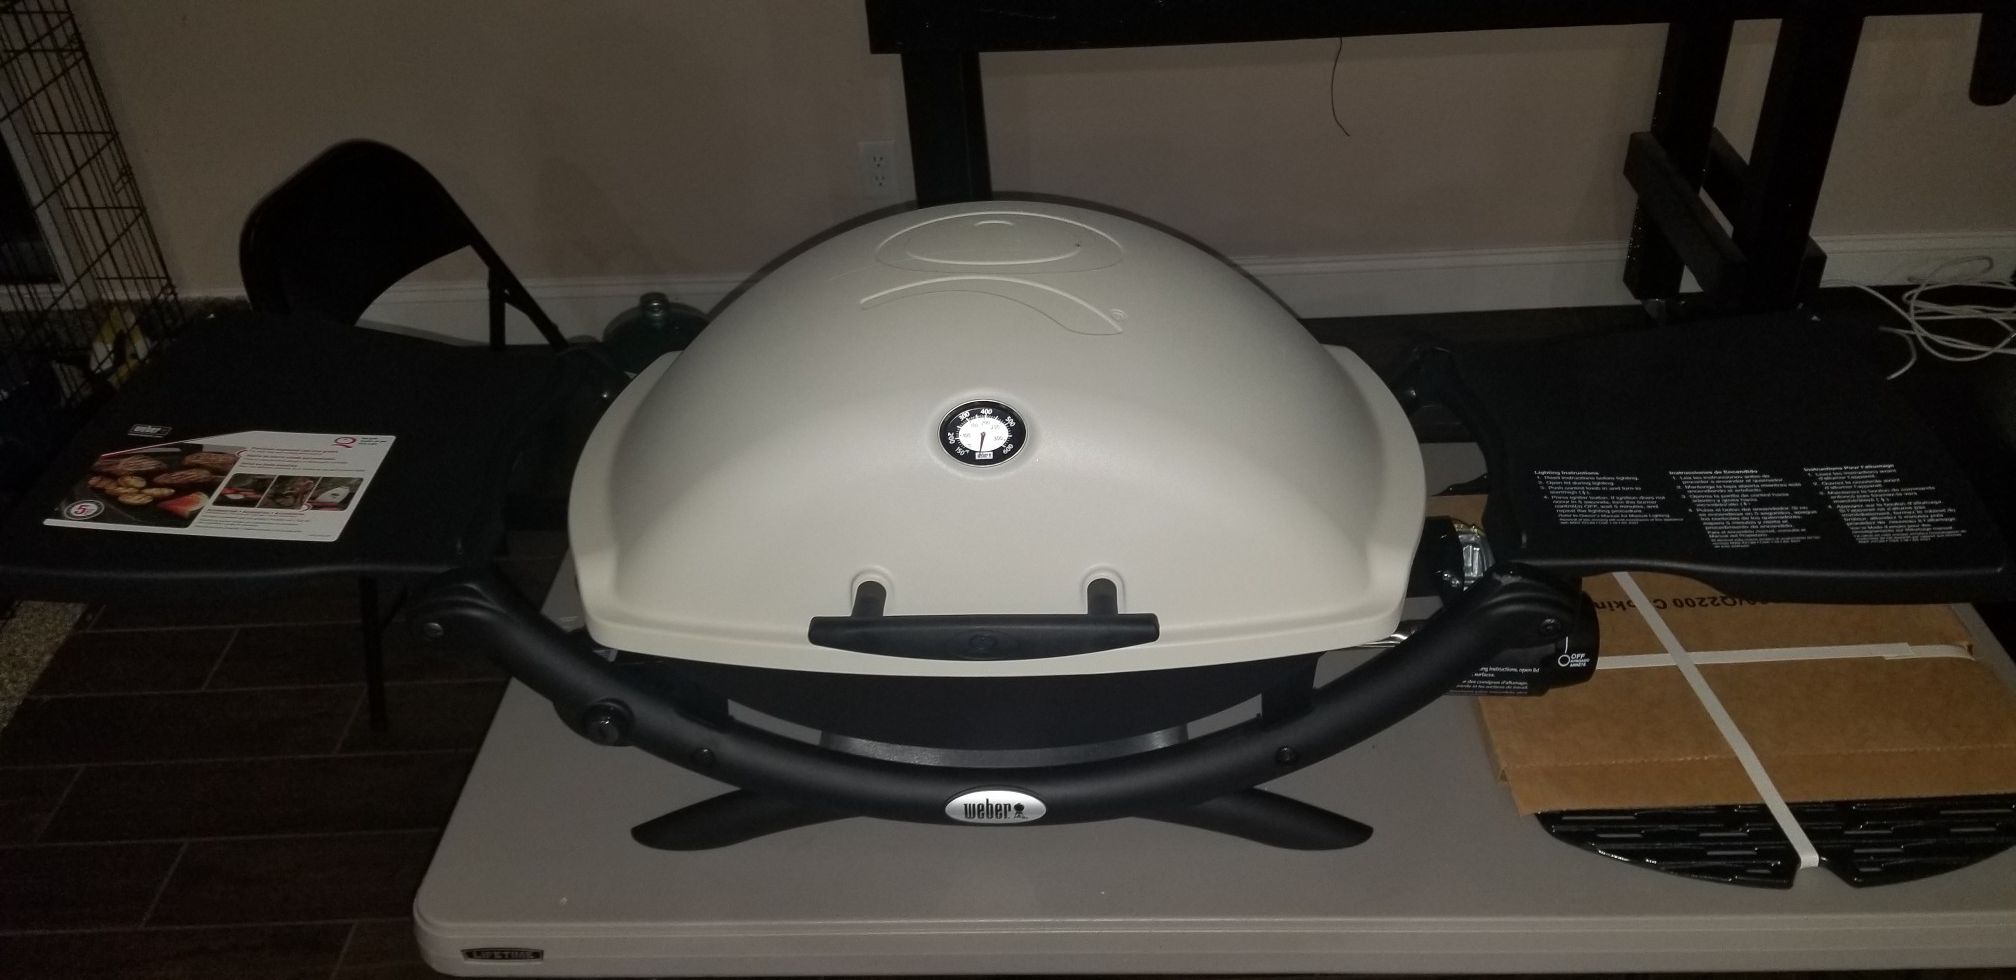 Weber 2200 portable tabletop grill, Brand new!